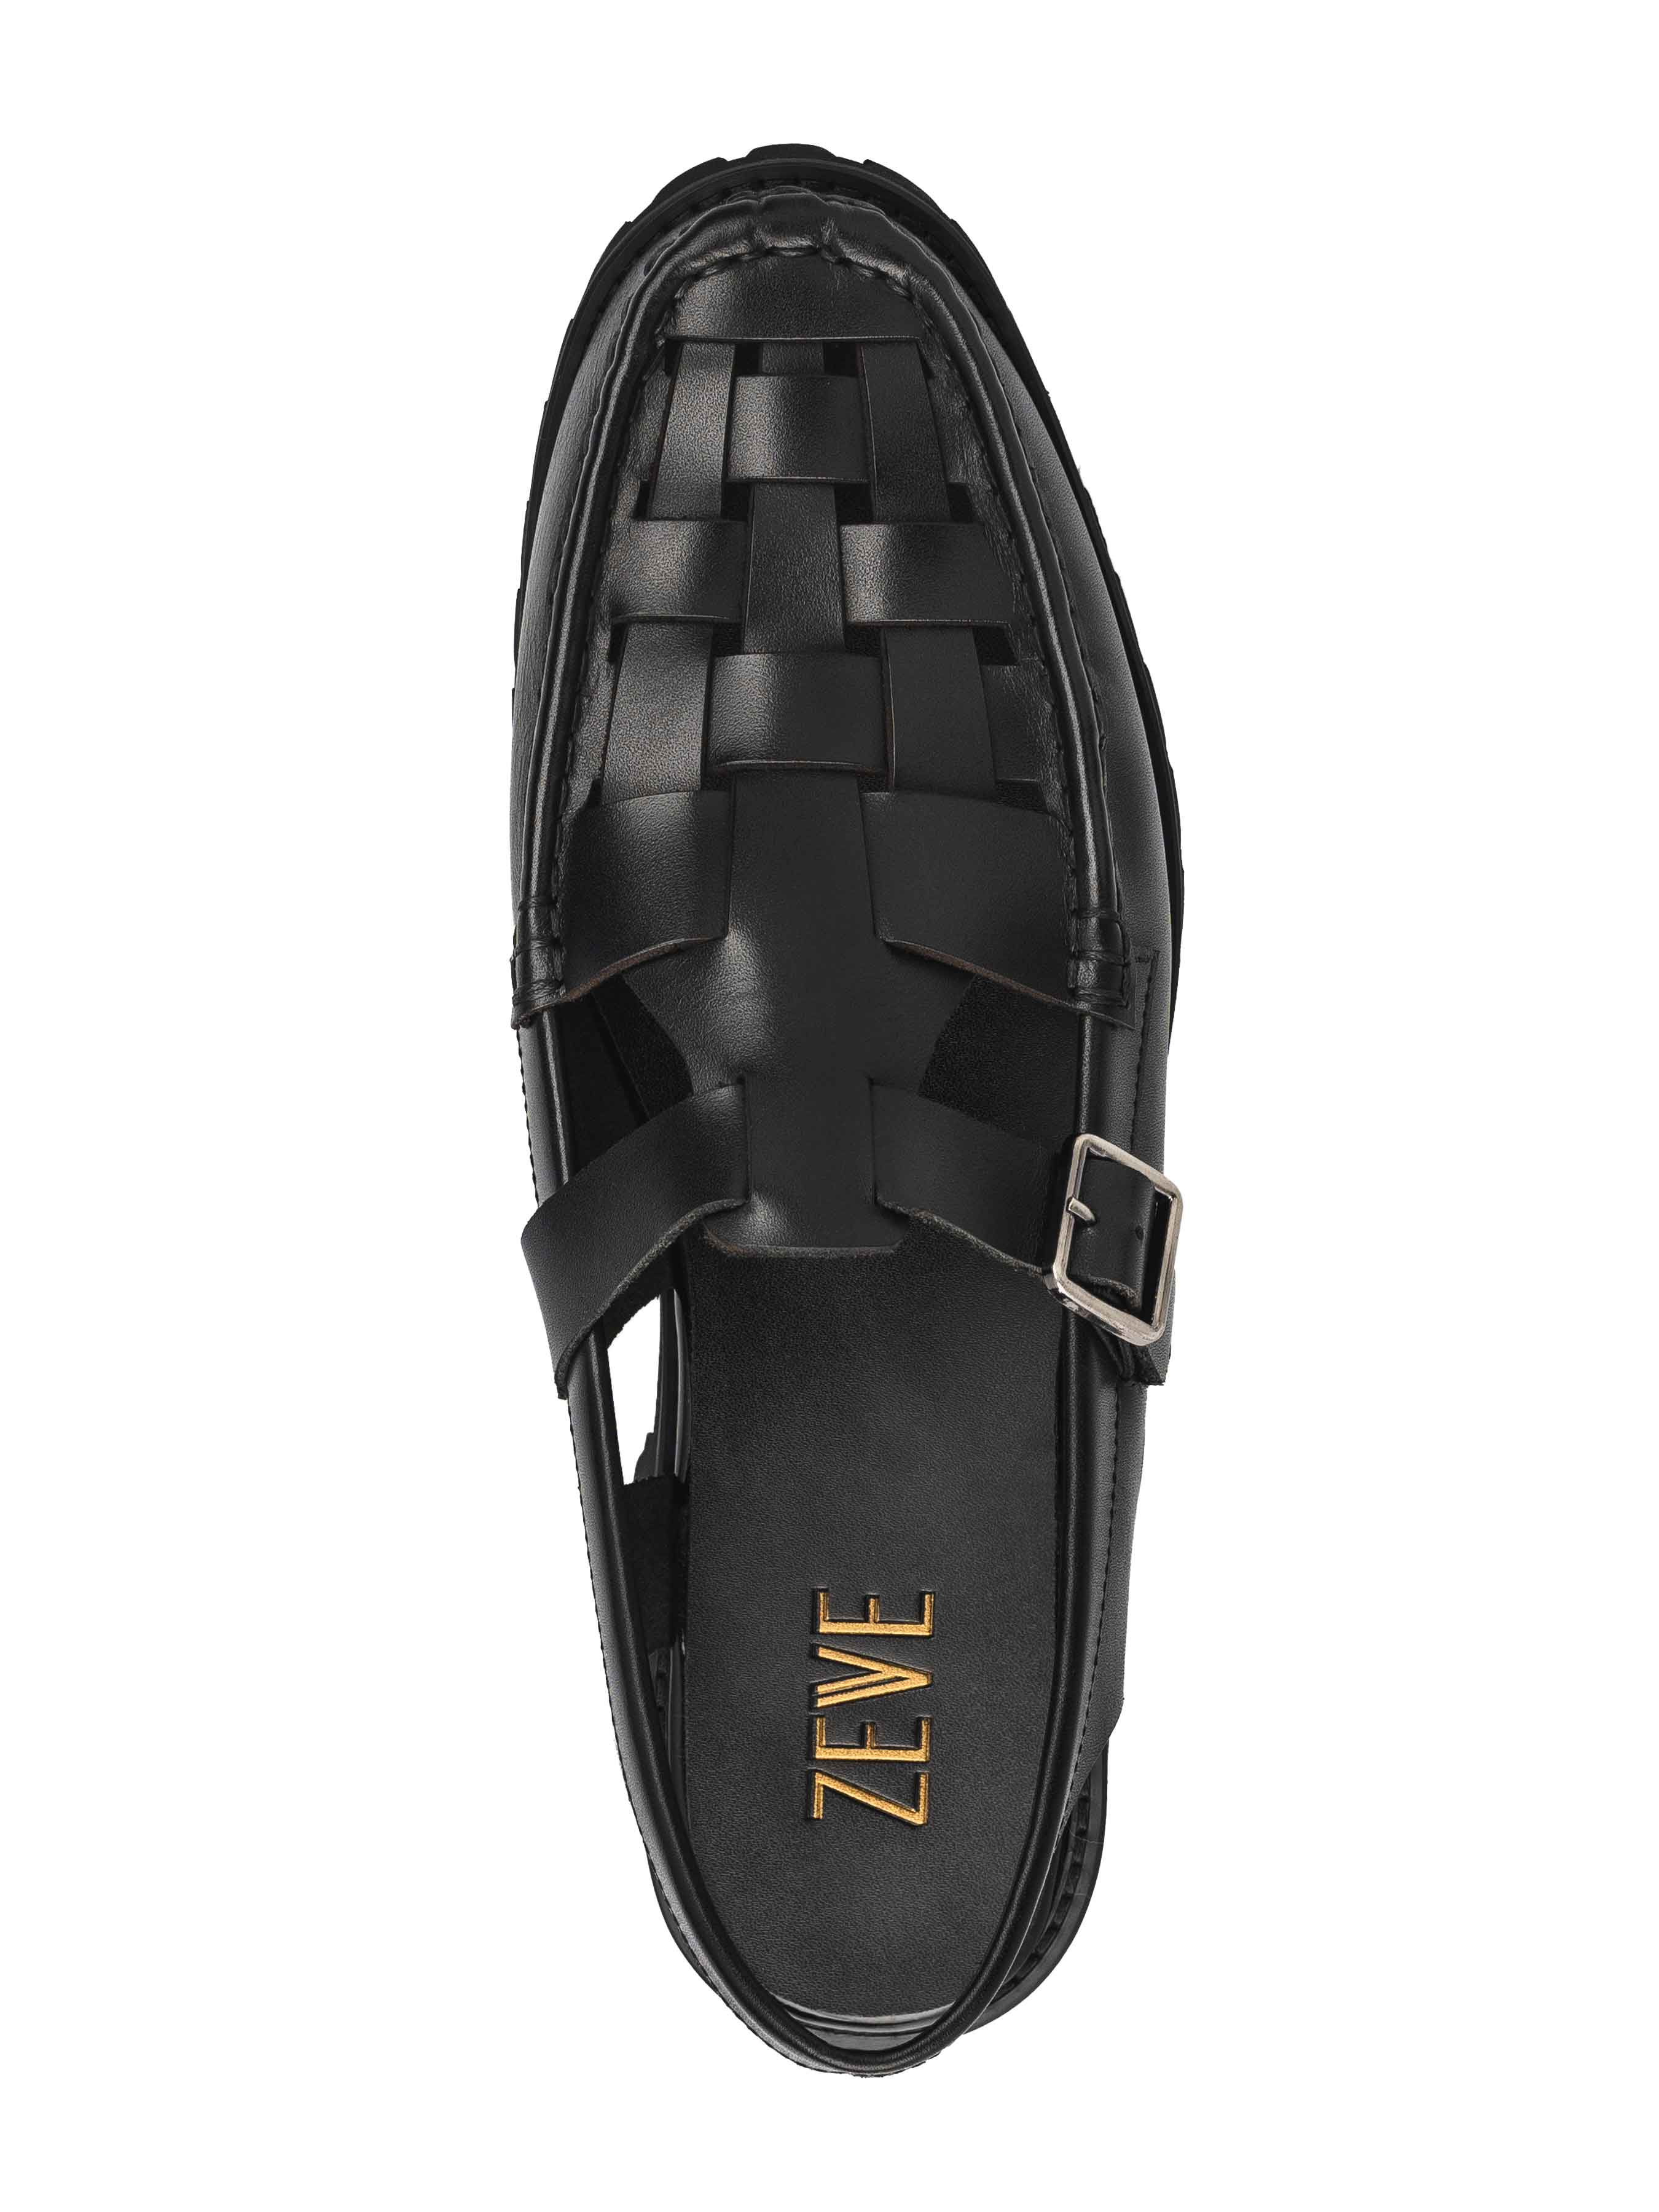 Perry Weave Sandal - Solid Black Leather (Chunky Sole)